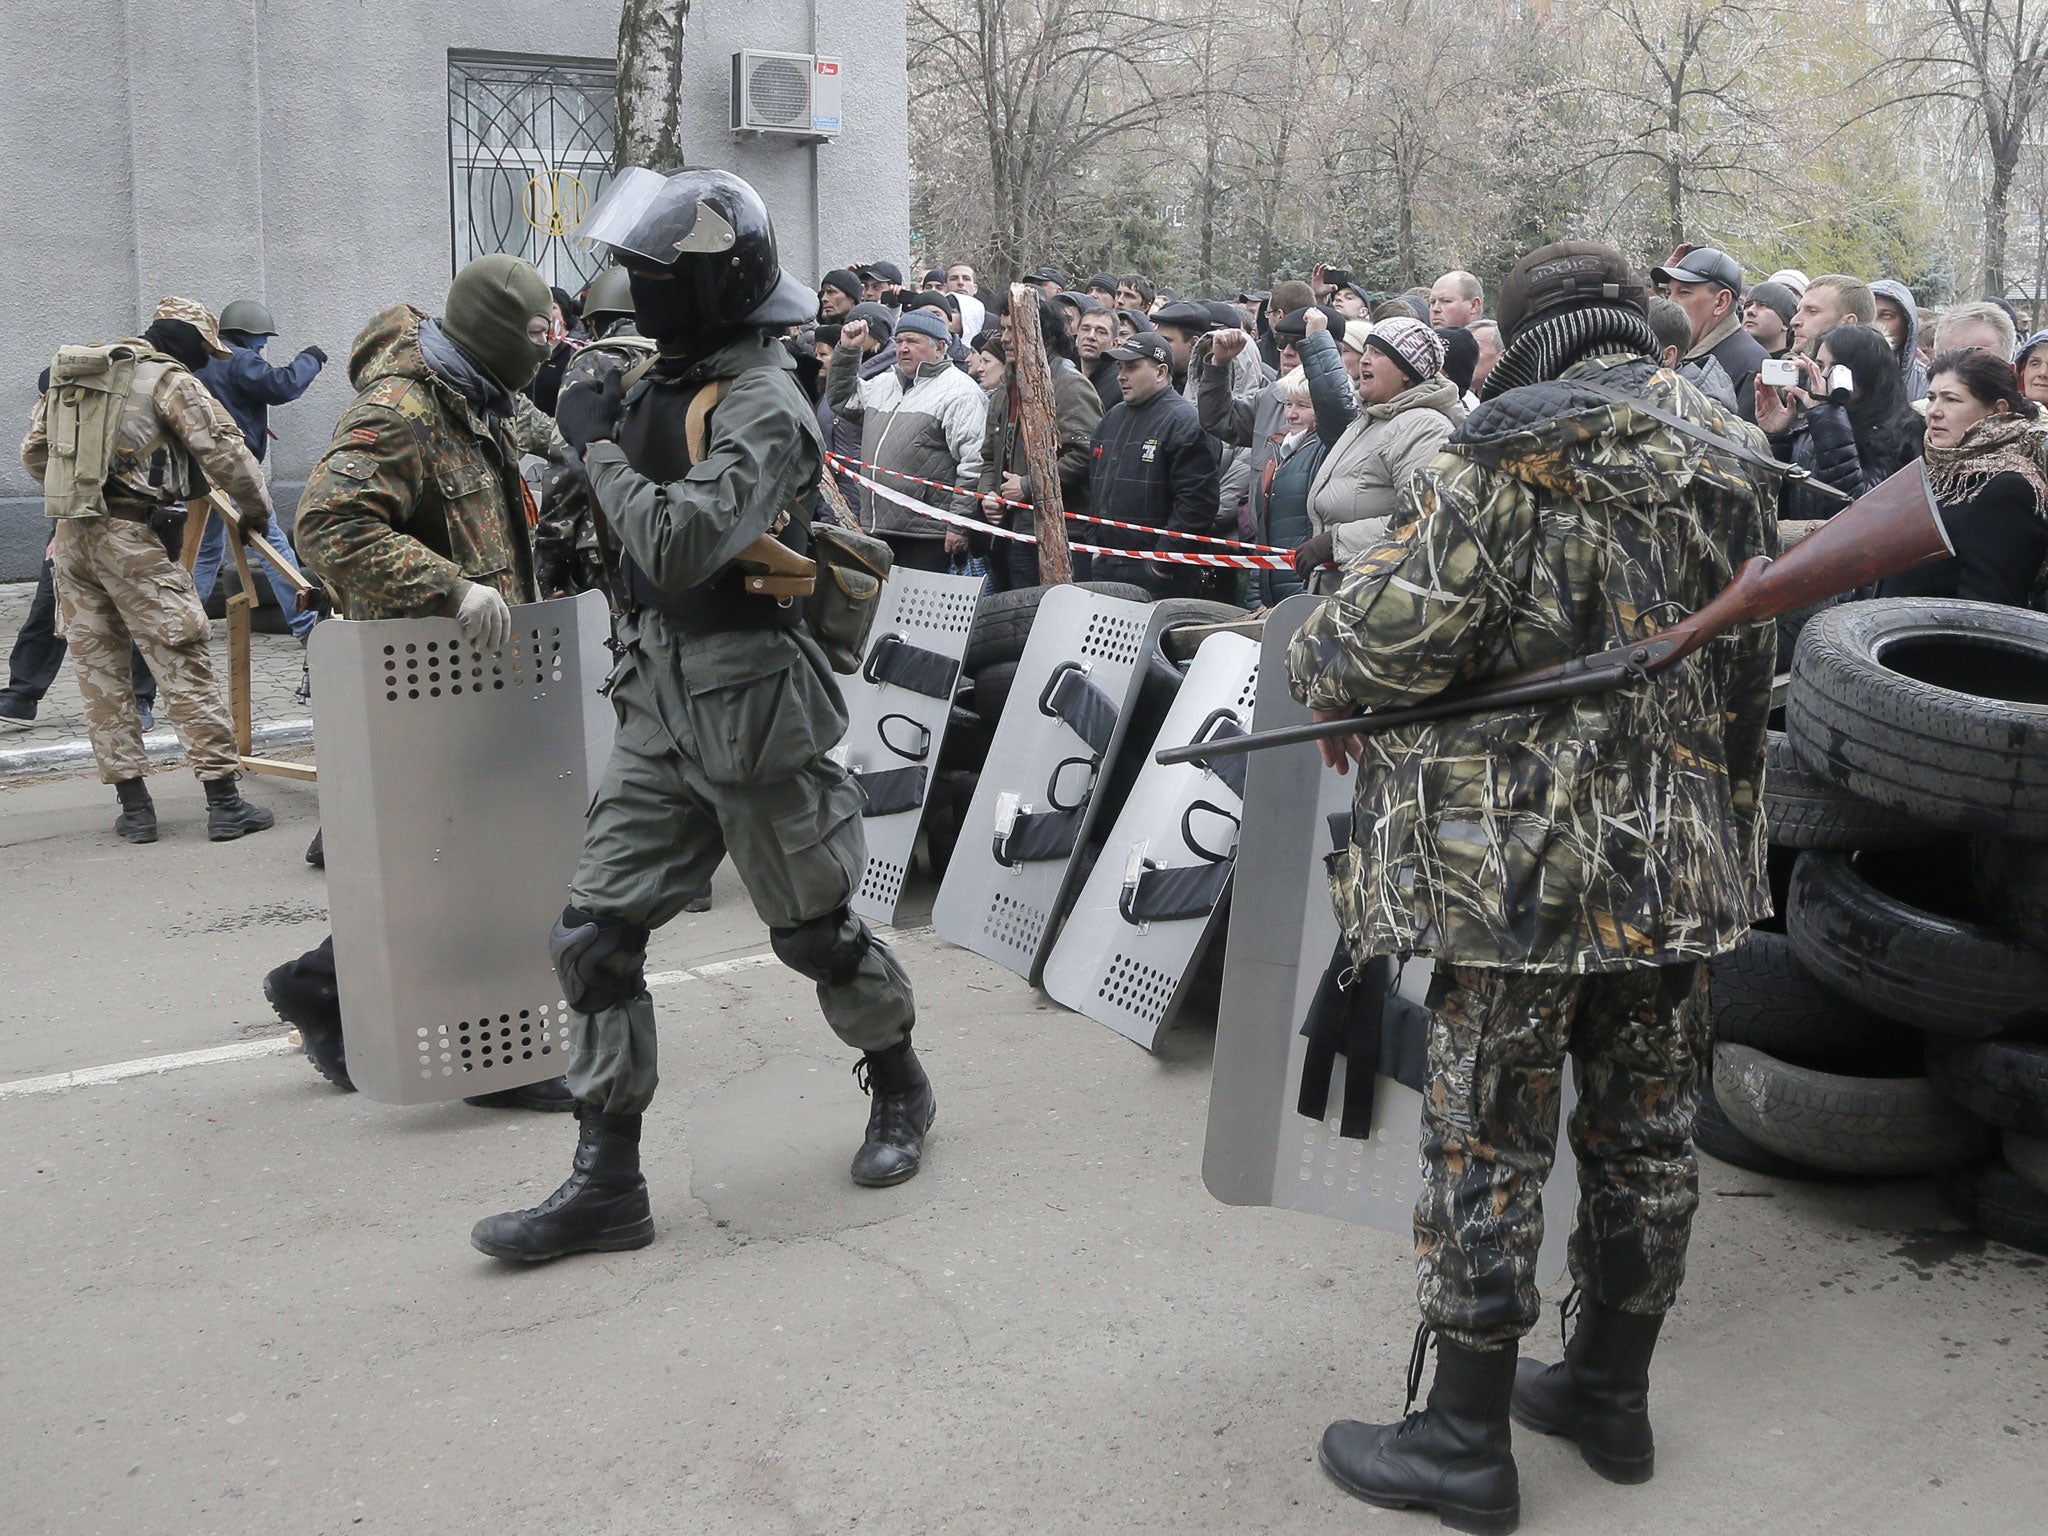 Pro-Russian activists occupy the police station carrying riot shields as people watch on, in the eastern Ukraine town of Slovyansk